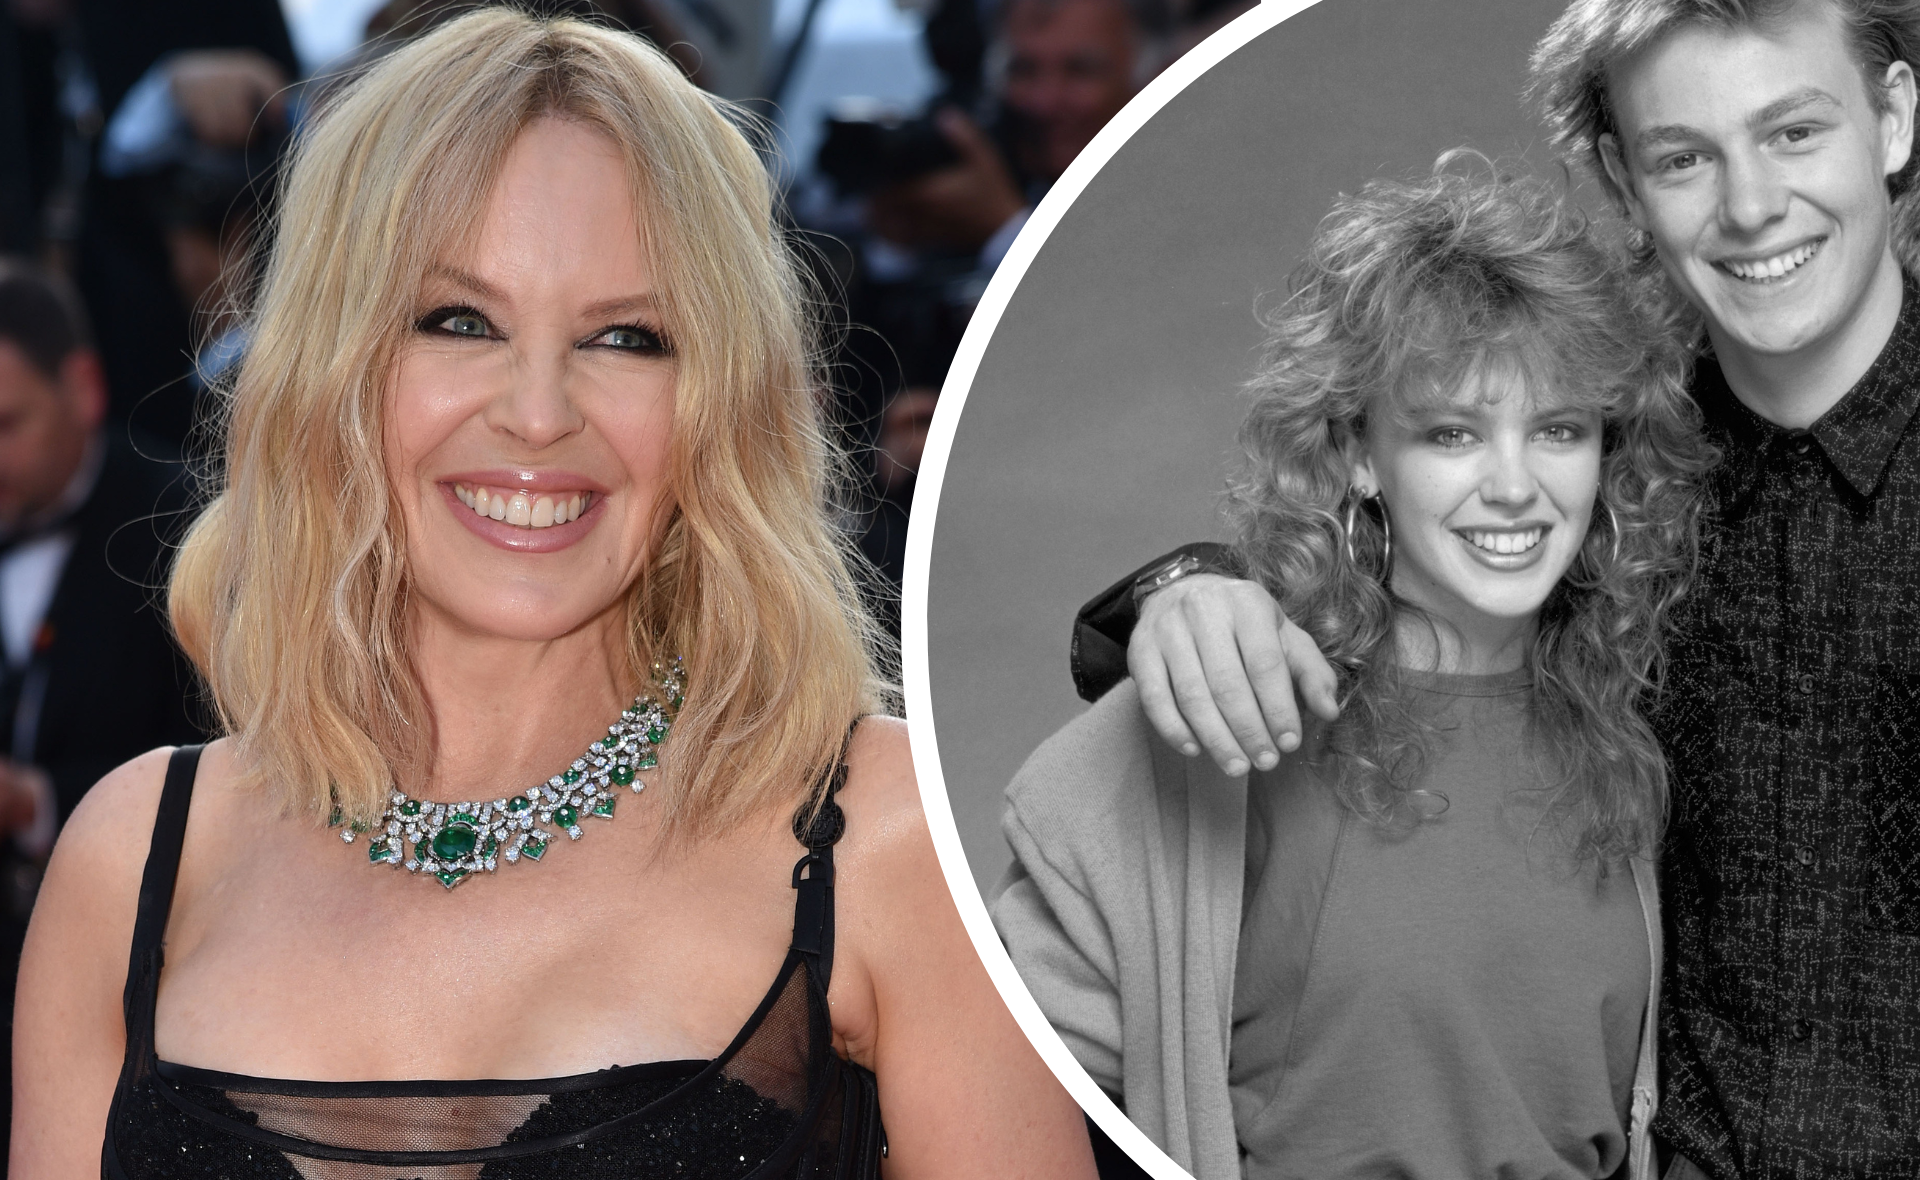 Kylie Minogue reveals she was “miffed” about the Neighbours reboot announcement